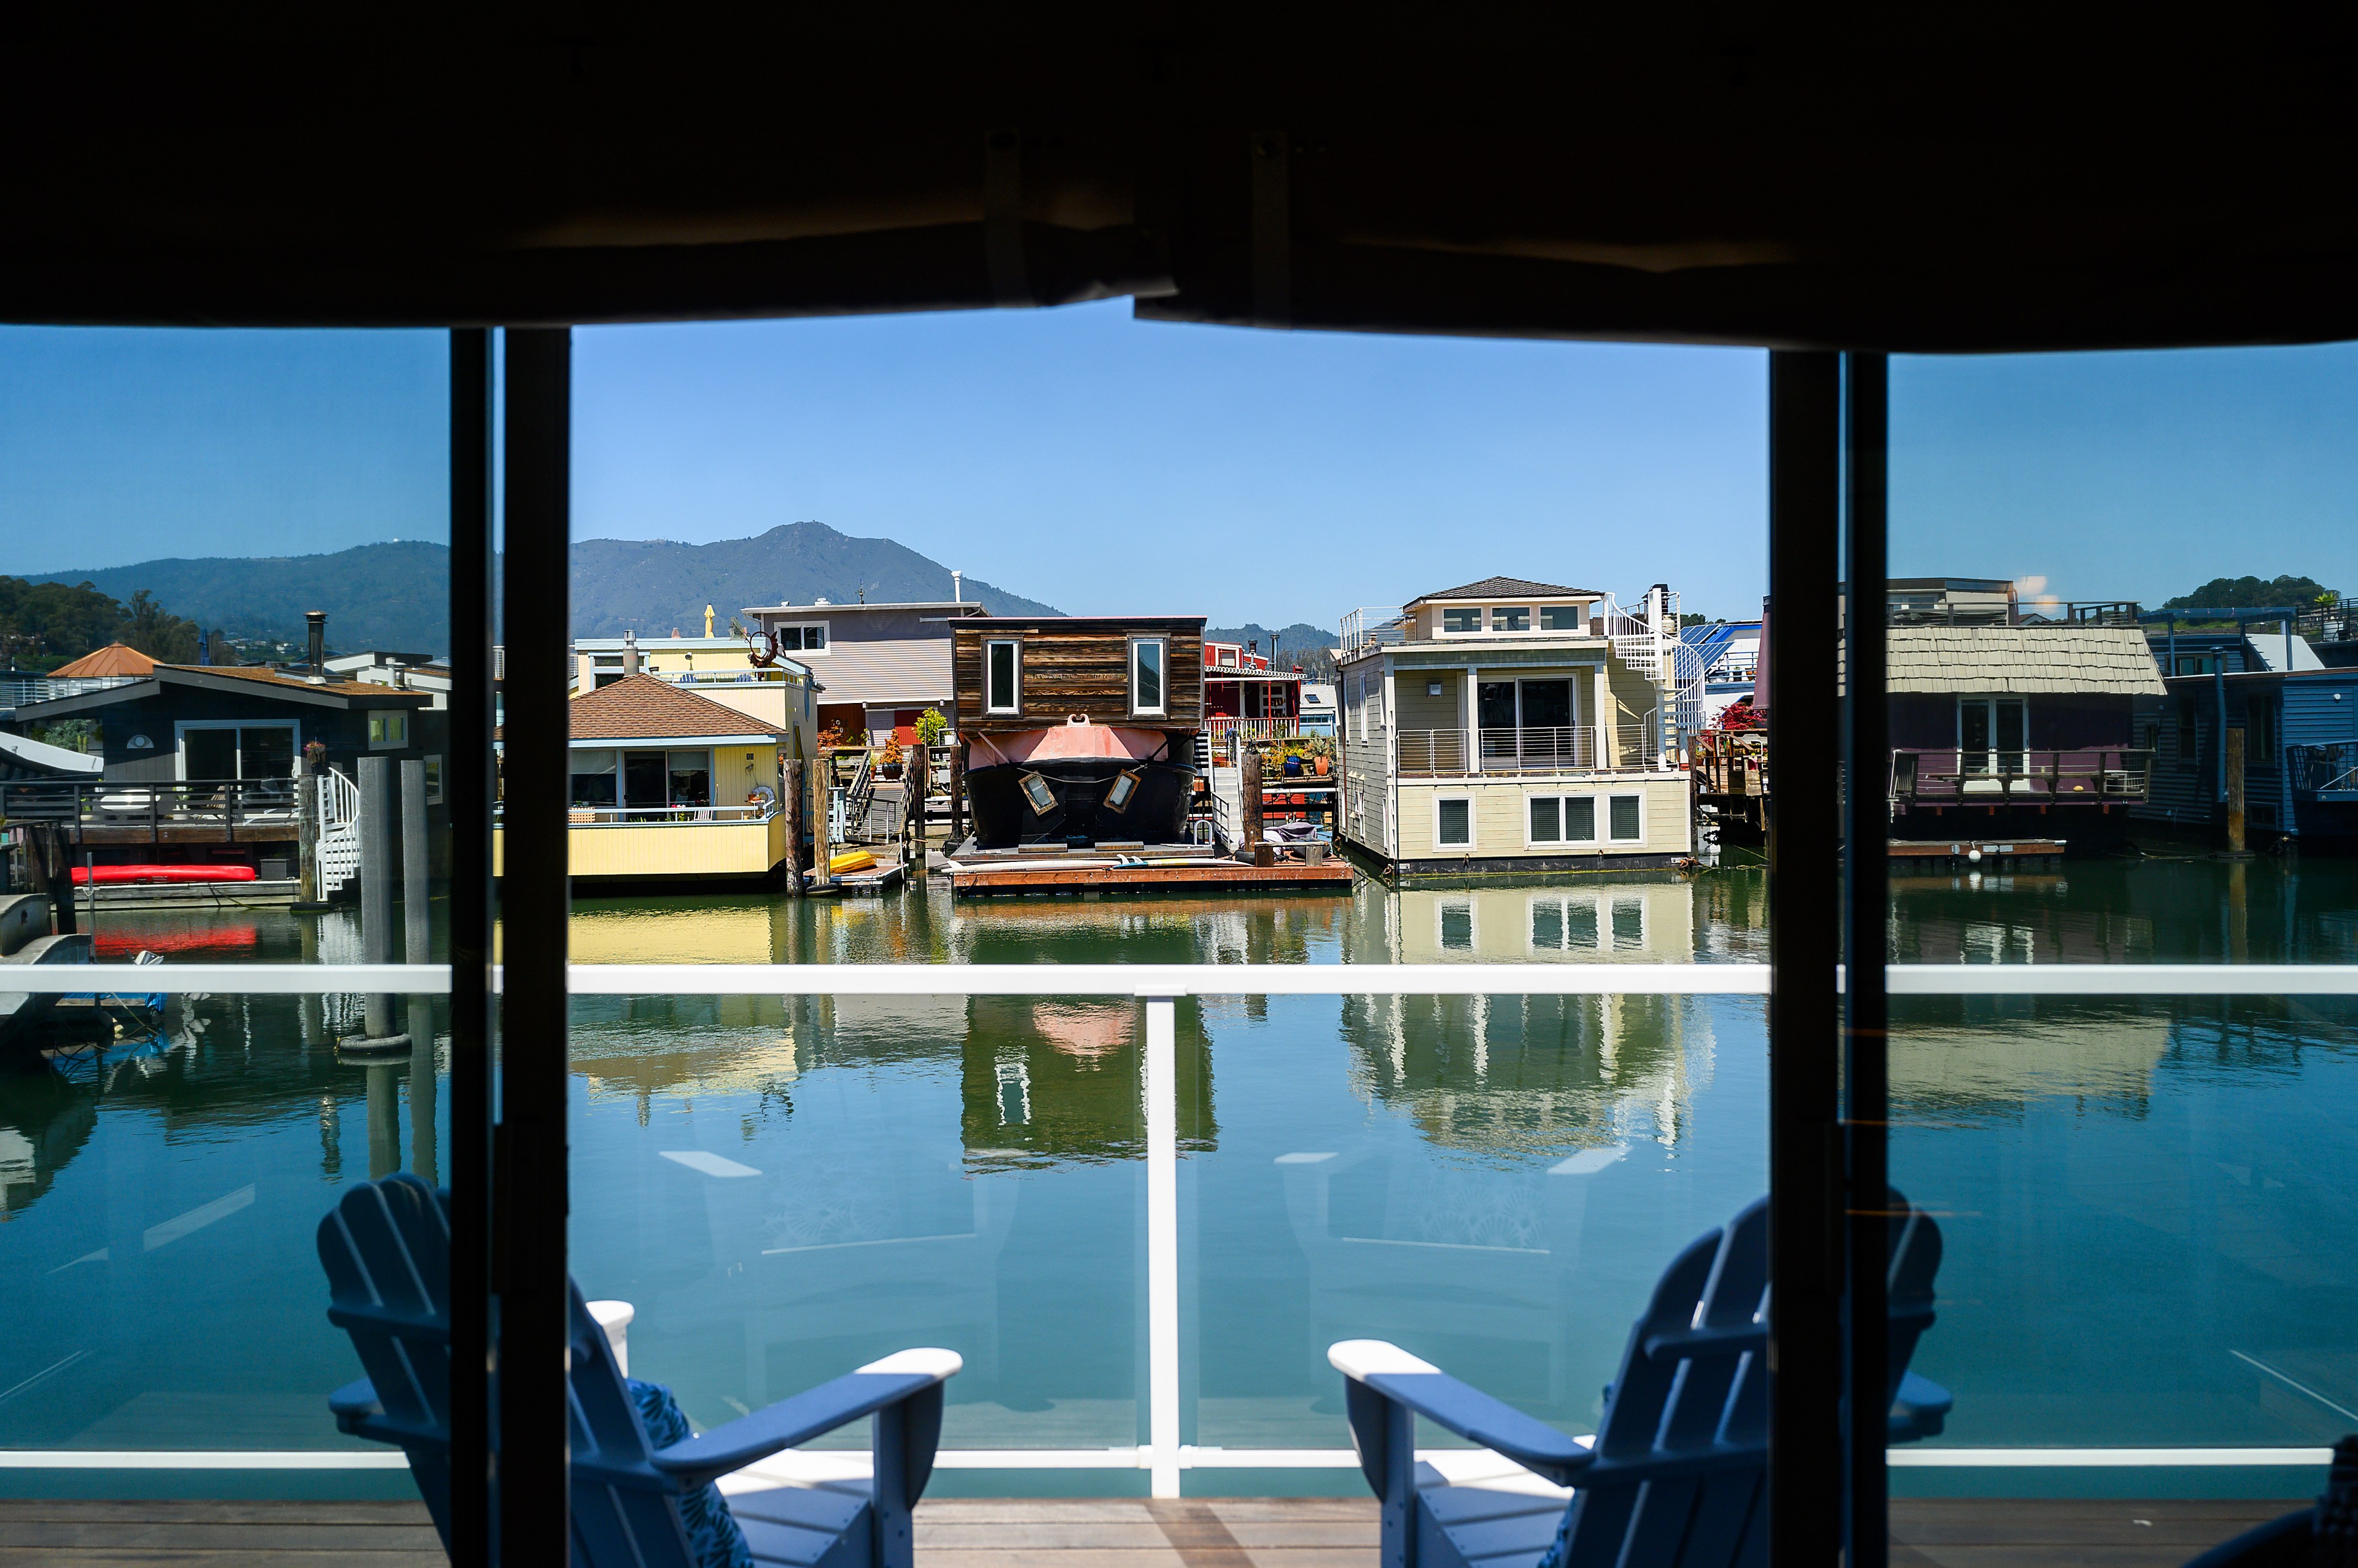 View from a balcony with chairs, overlooking colorful floating houses and calm water, with mountains in the distance.